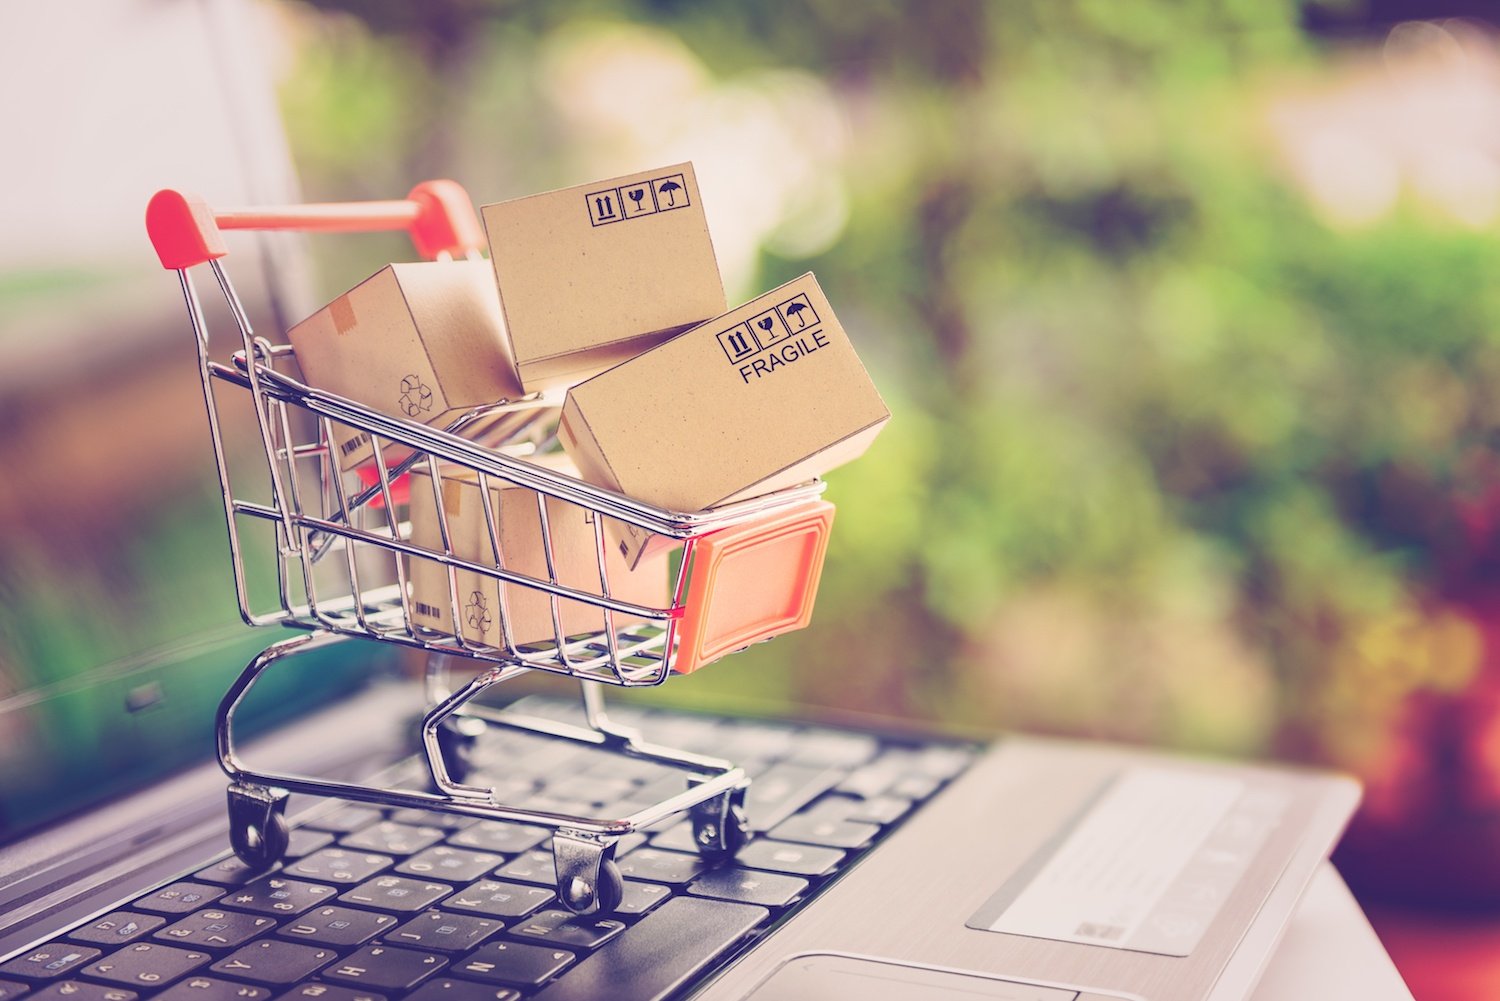 How You Can Get Started in E-Commerce